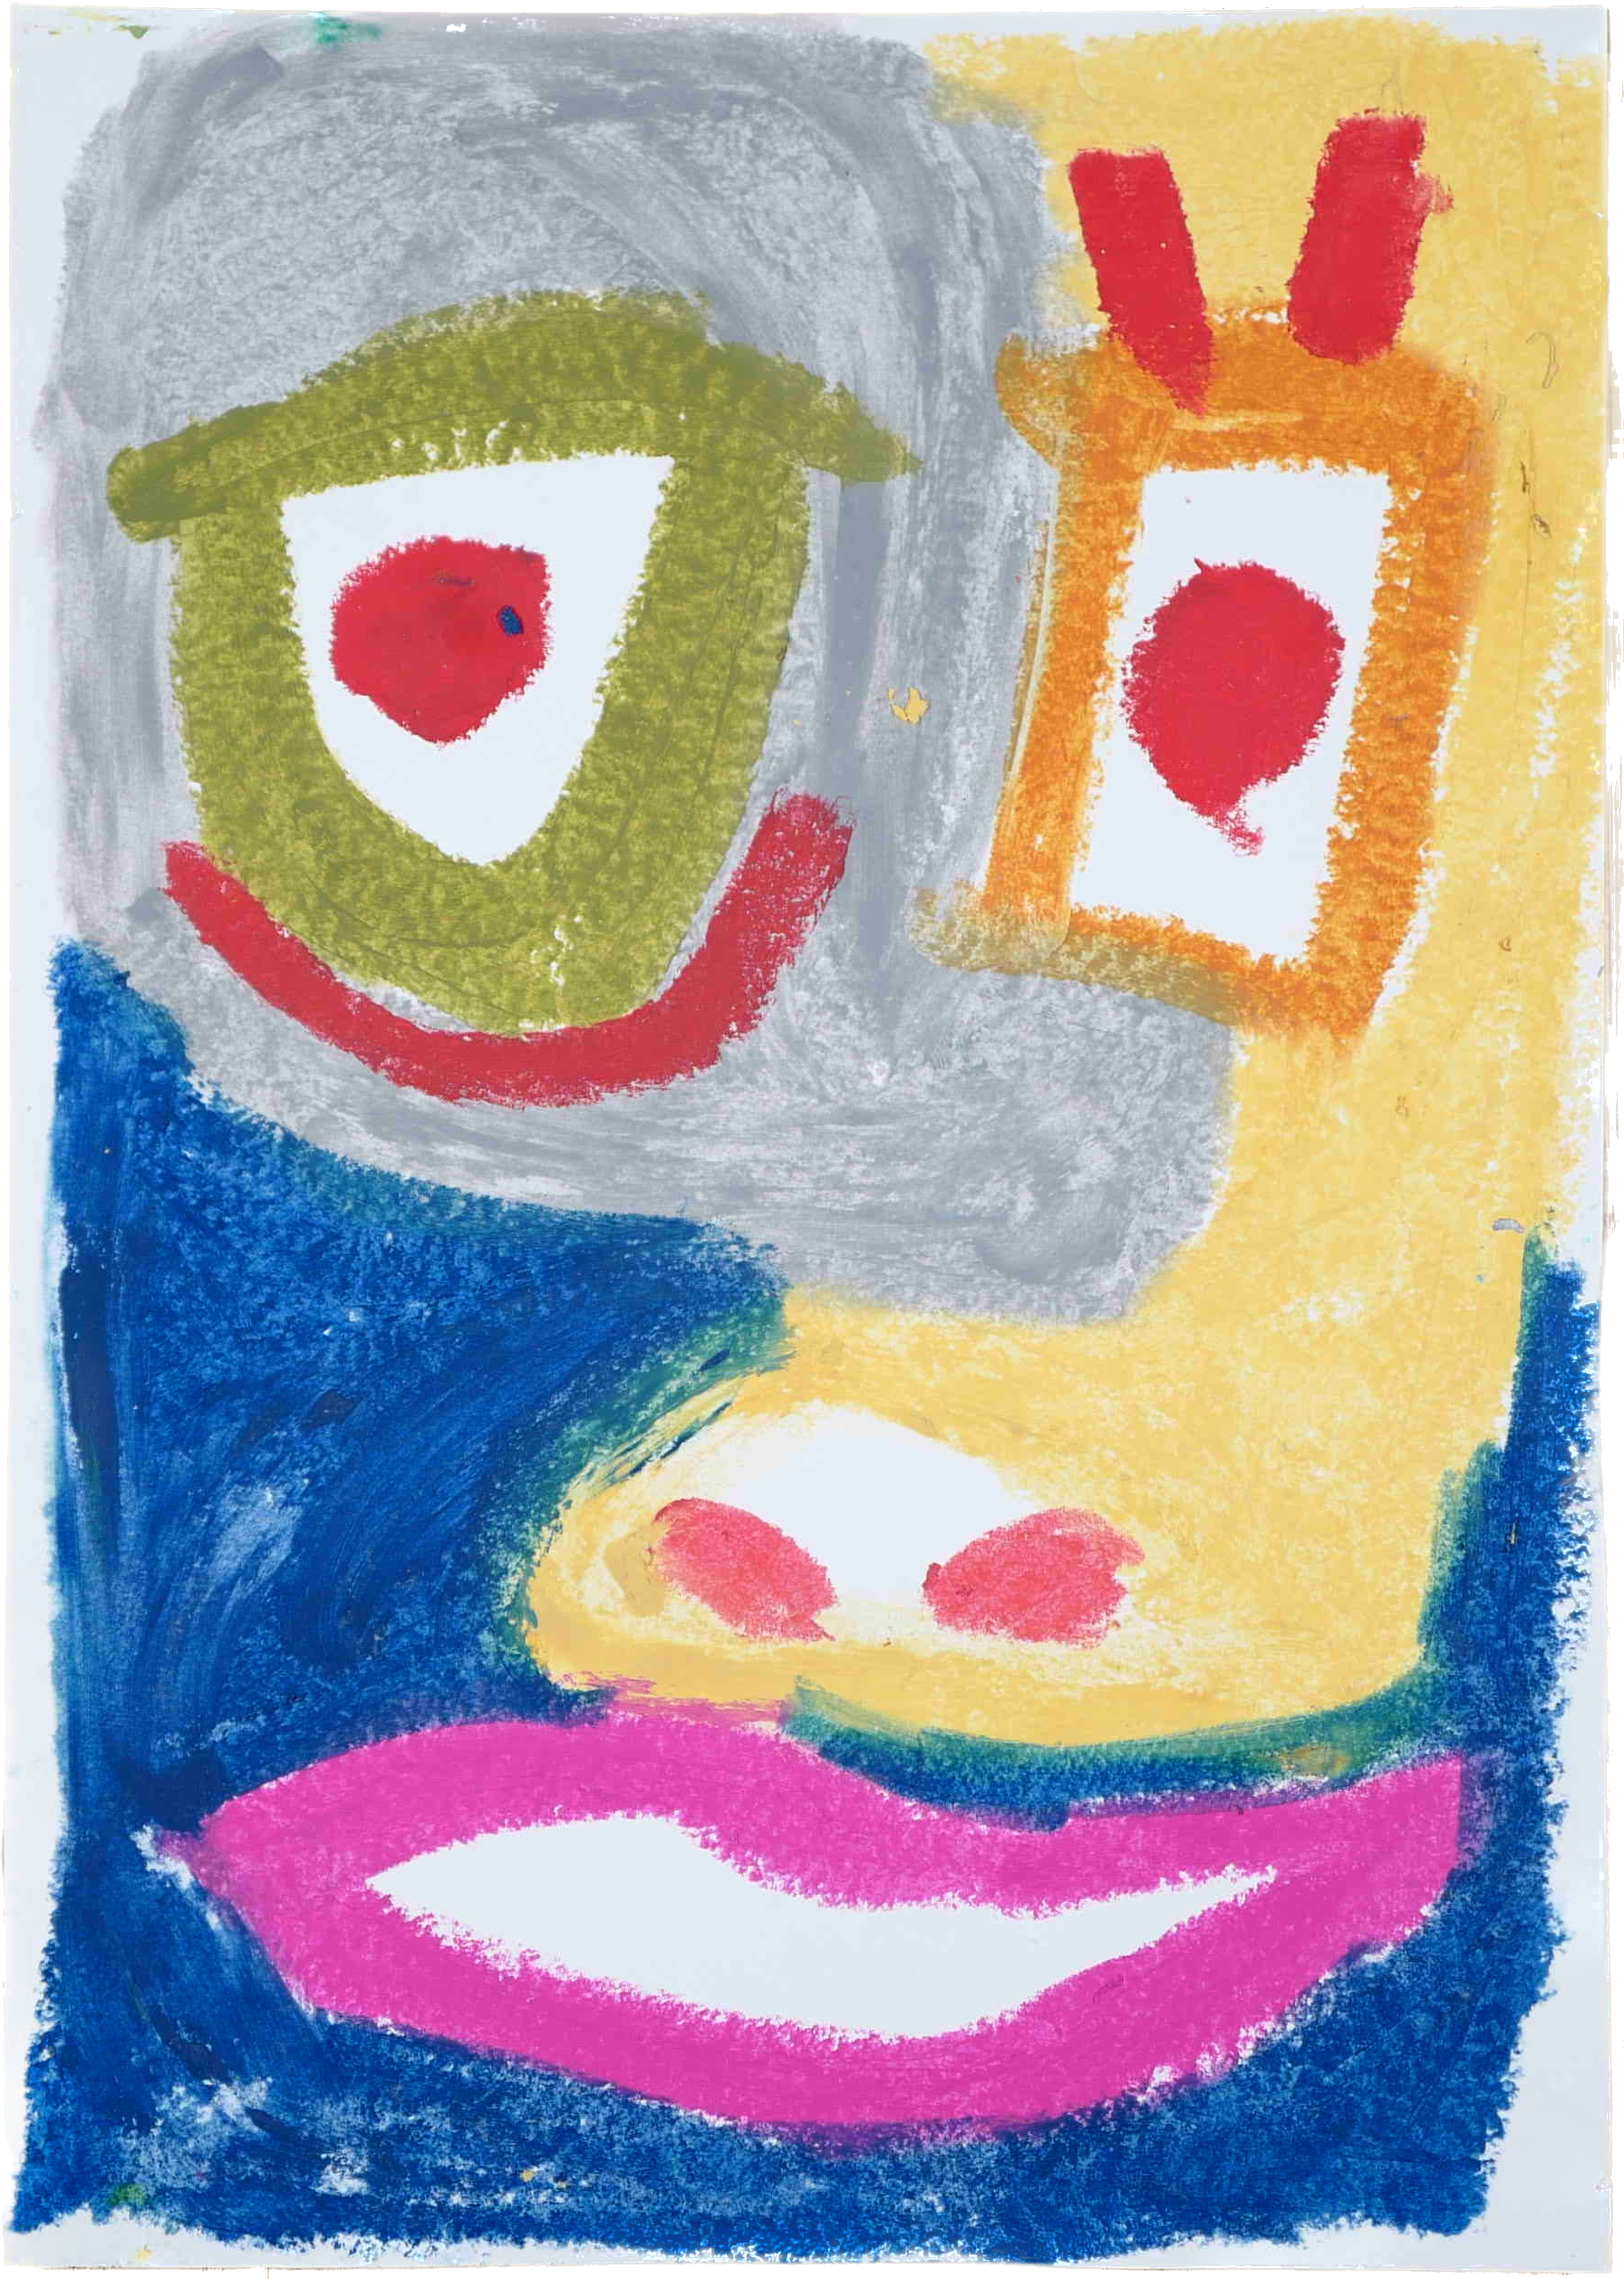 "Abstract eye-like forms in Lenfantvivant artwork" "Vivid oil pastel art in Sauna Fusion series" "Lenfantvivant abstract Sauna Fusion Art on paper" "Colorful abstract face by Lenfantvivant" "Creative abstract interpretation with vibrant pastels"